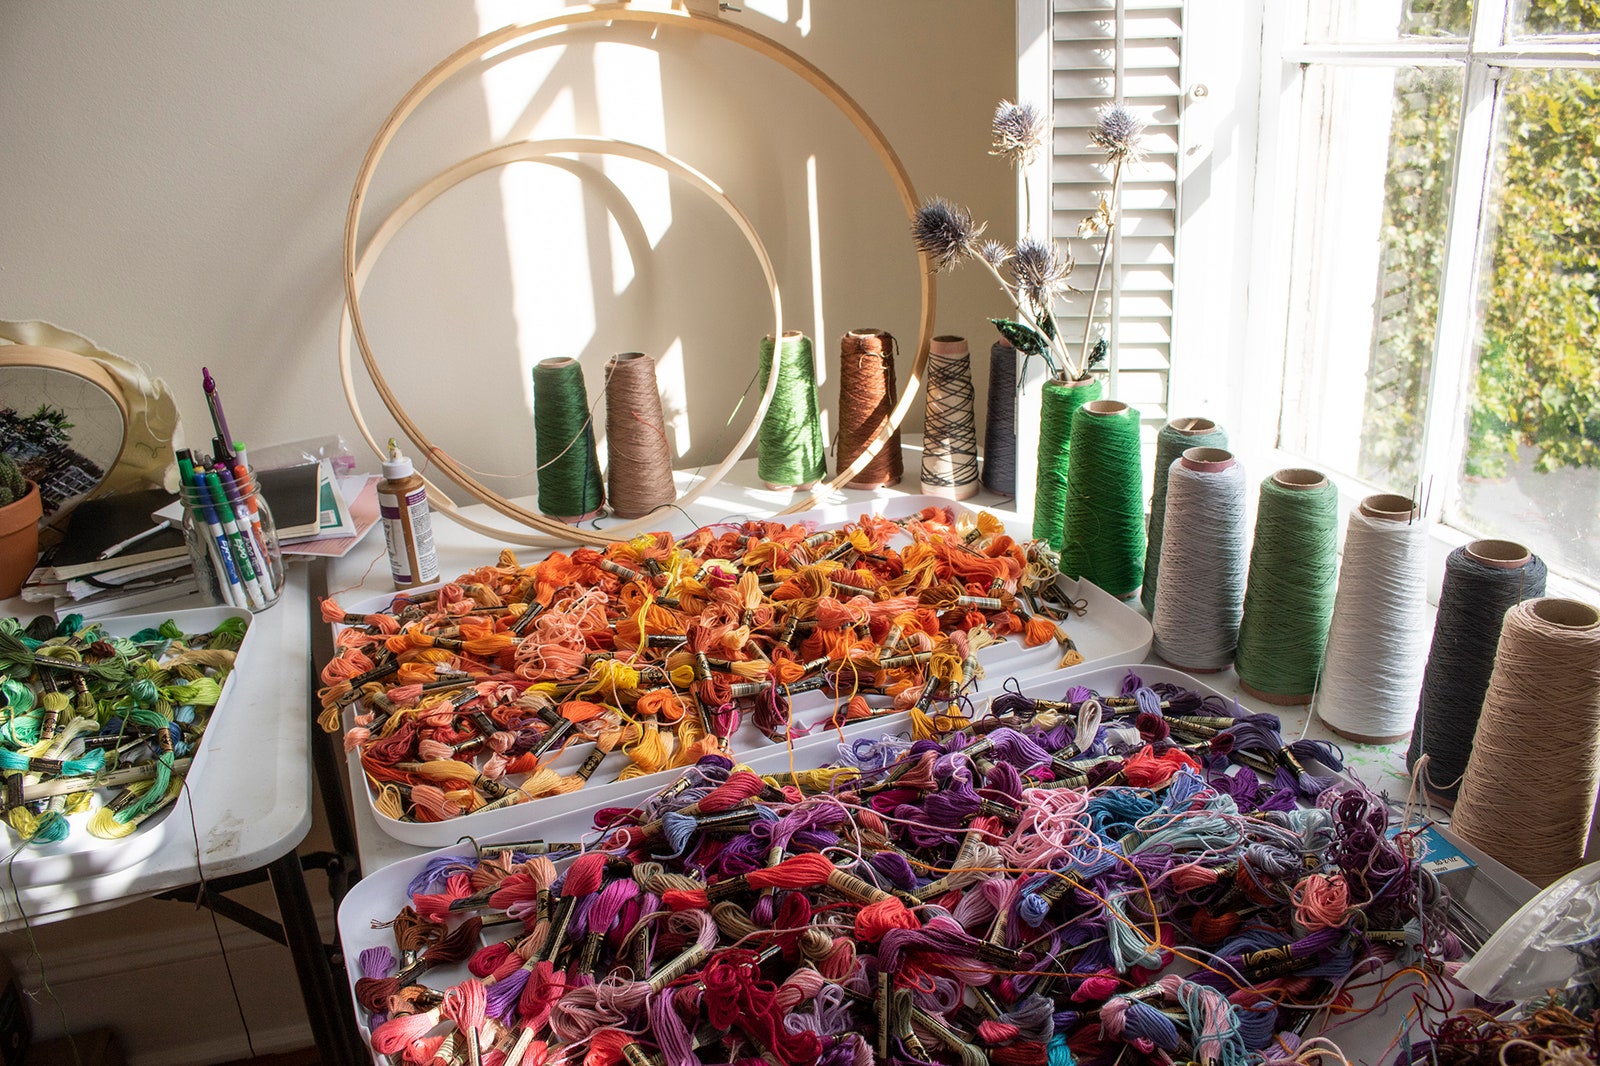 Basins filled with rainbows of thread and embroidery hoops inside Narrett's studio.